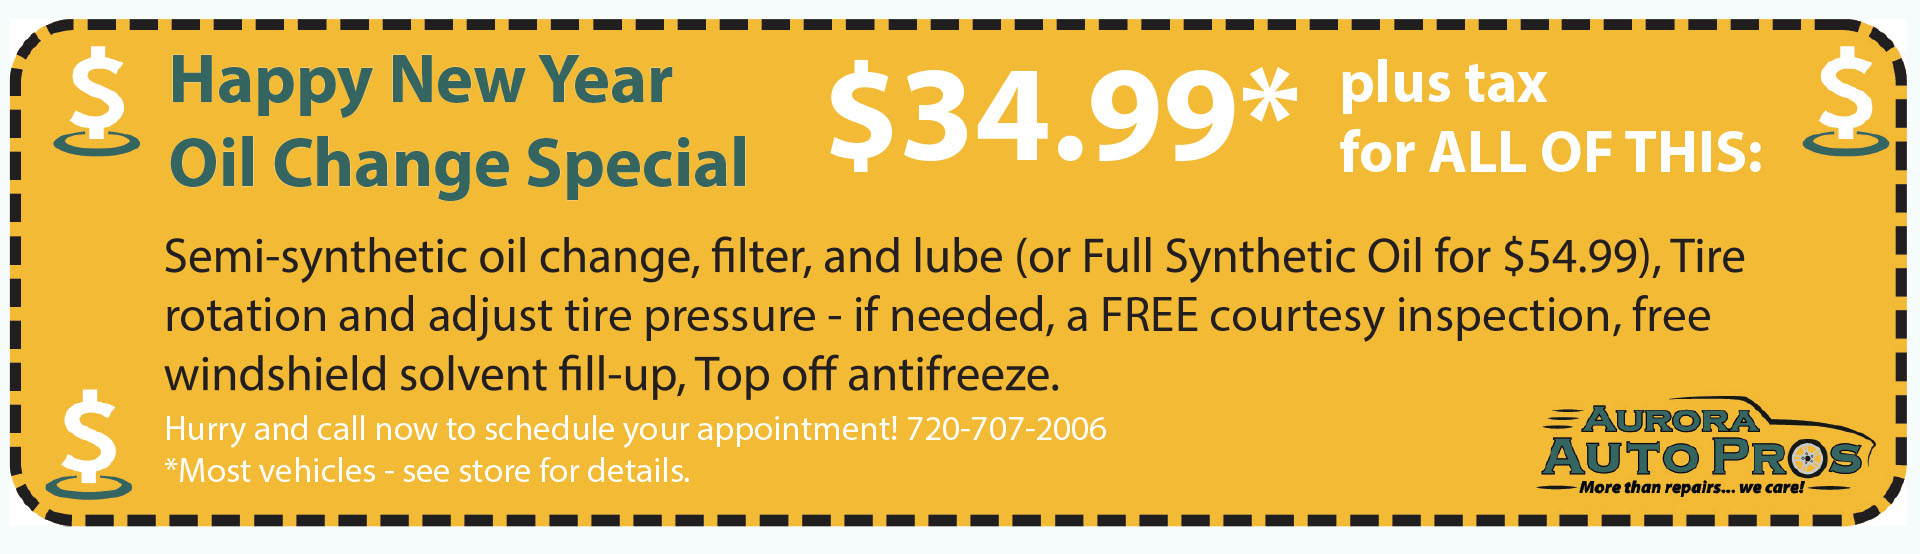 New Year Oil Change Special